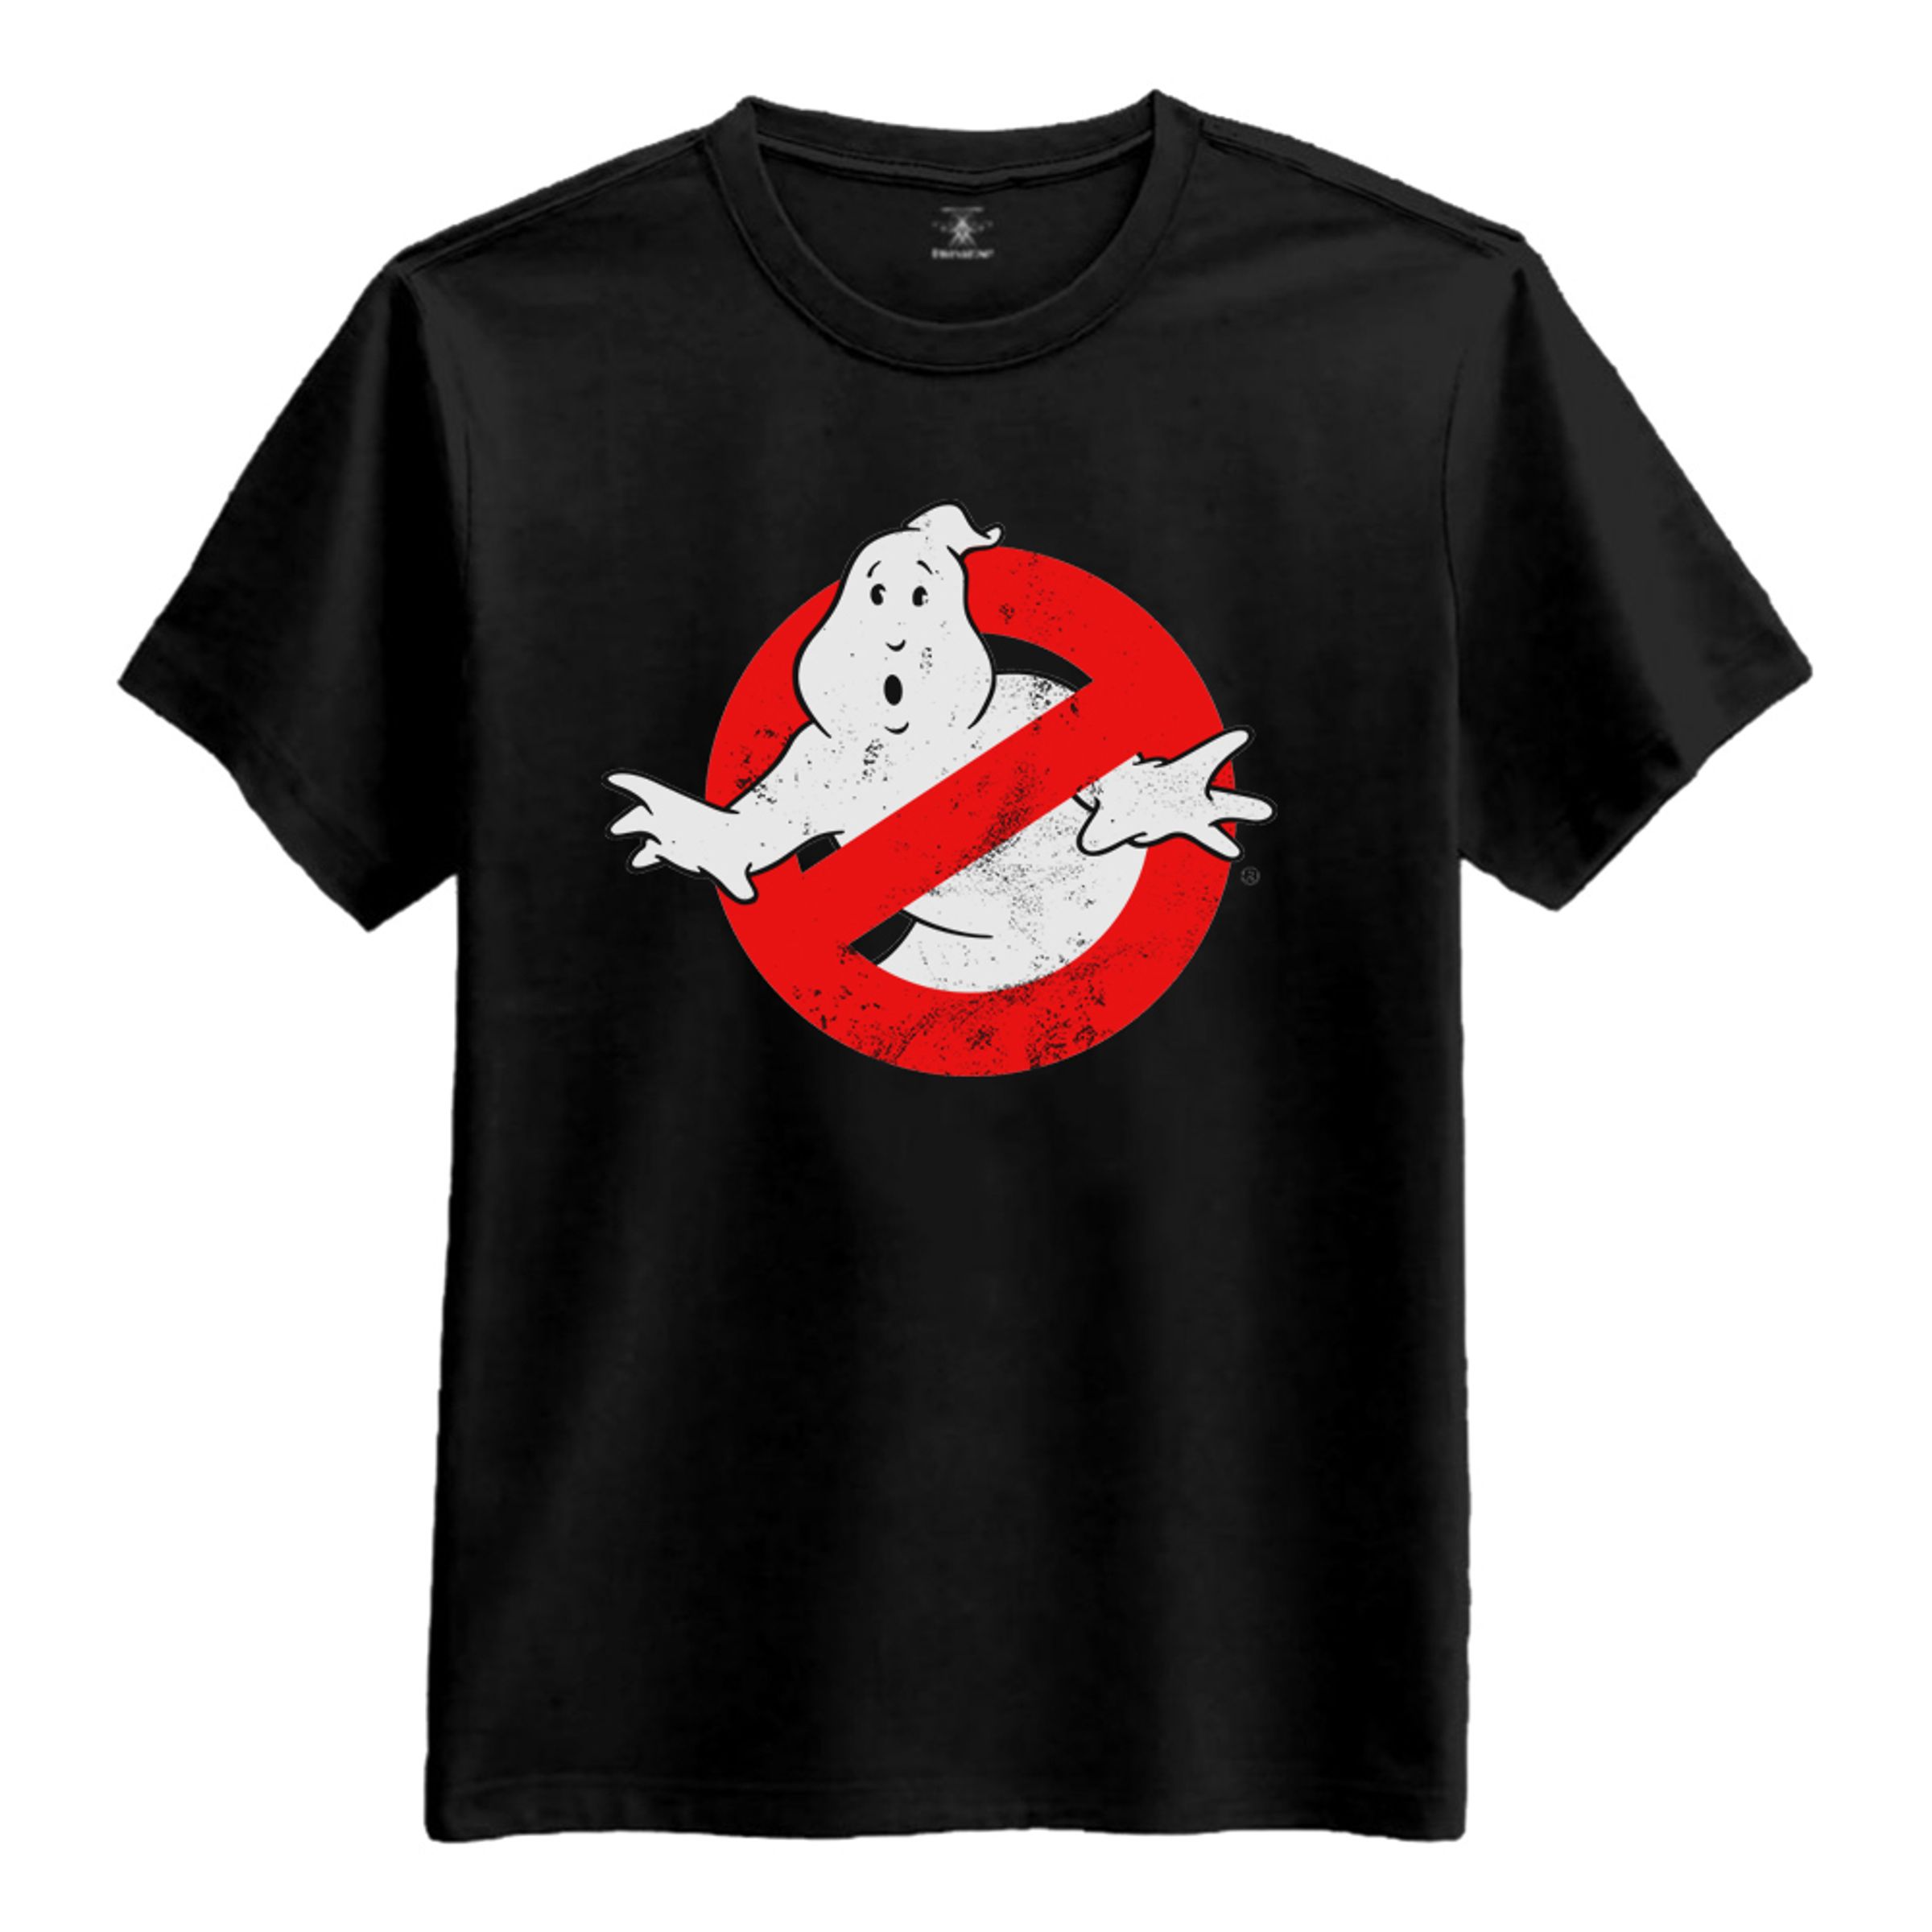 Ghostbusters Logo T-shirt - X-Large